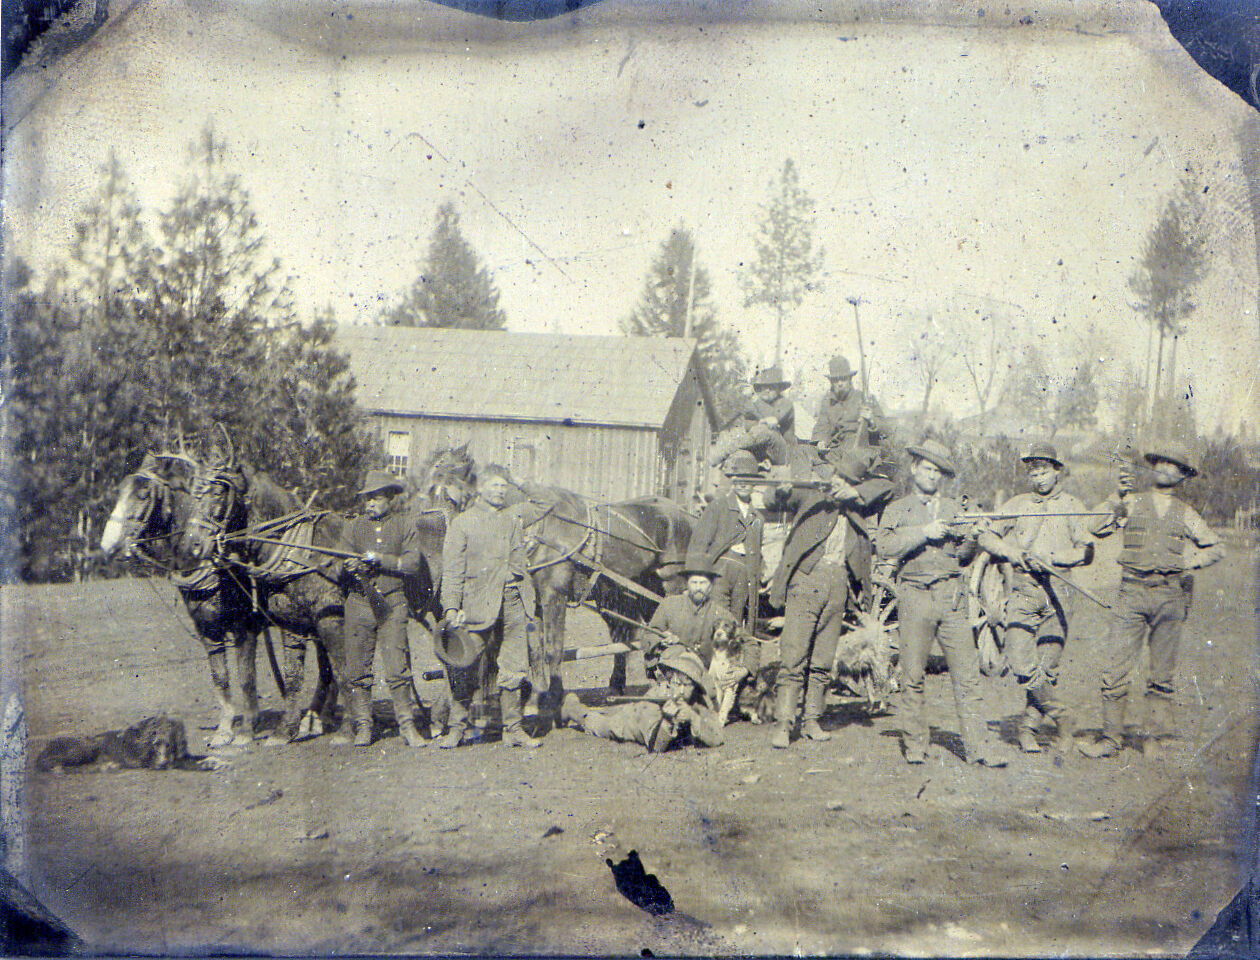 Extremely Rare Christmas Wild West Cowboys With Guns Tintype Northern California